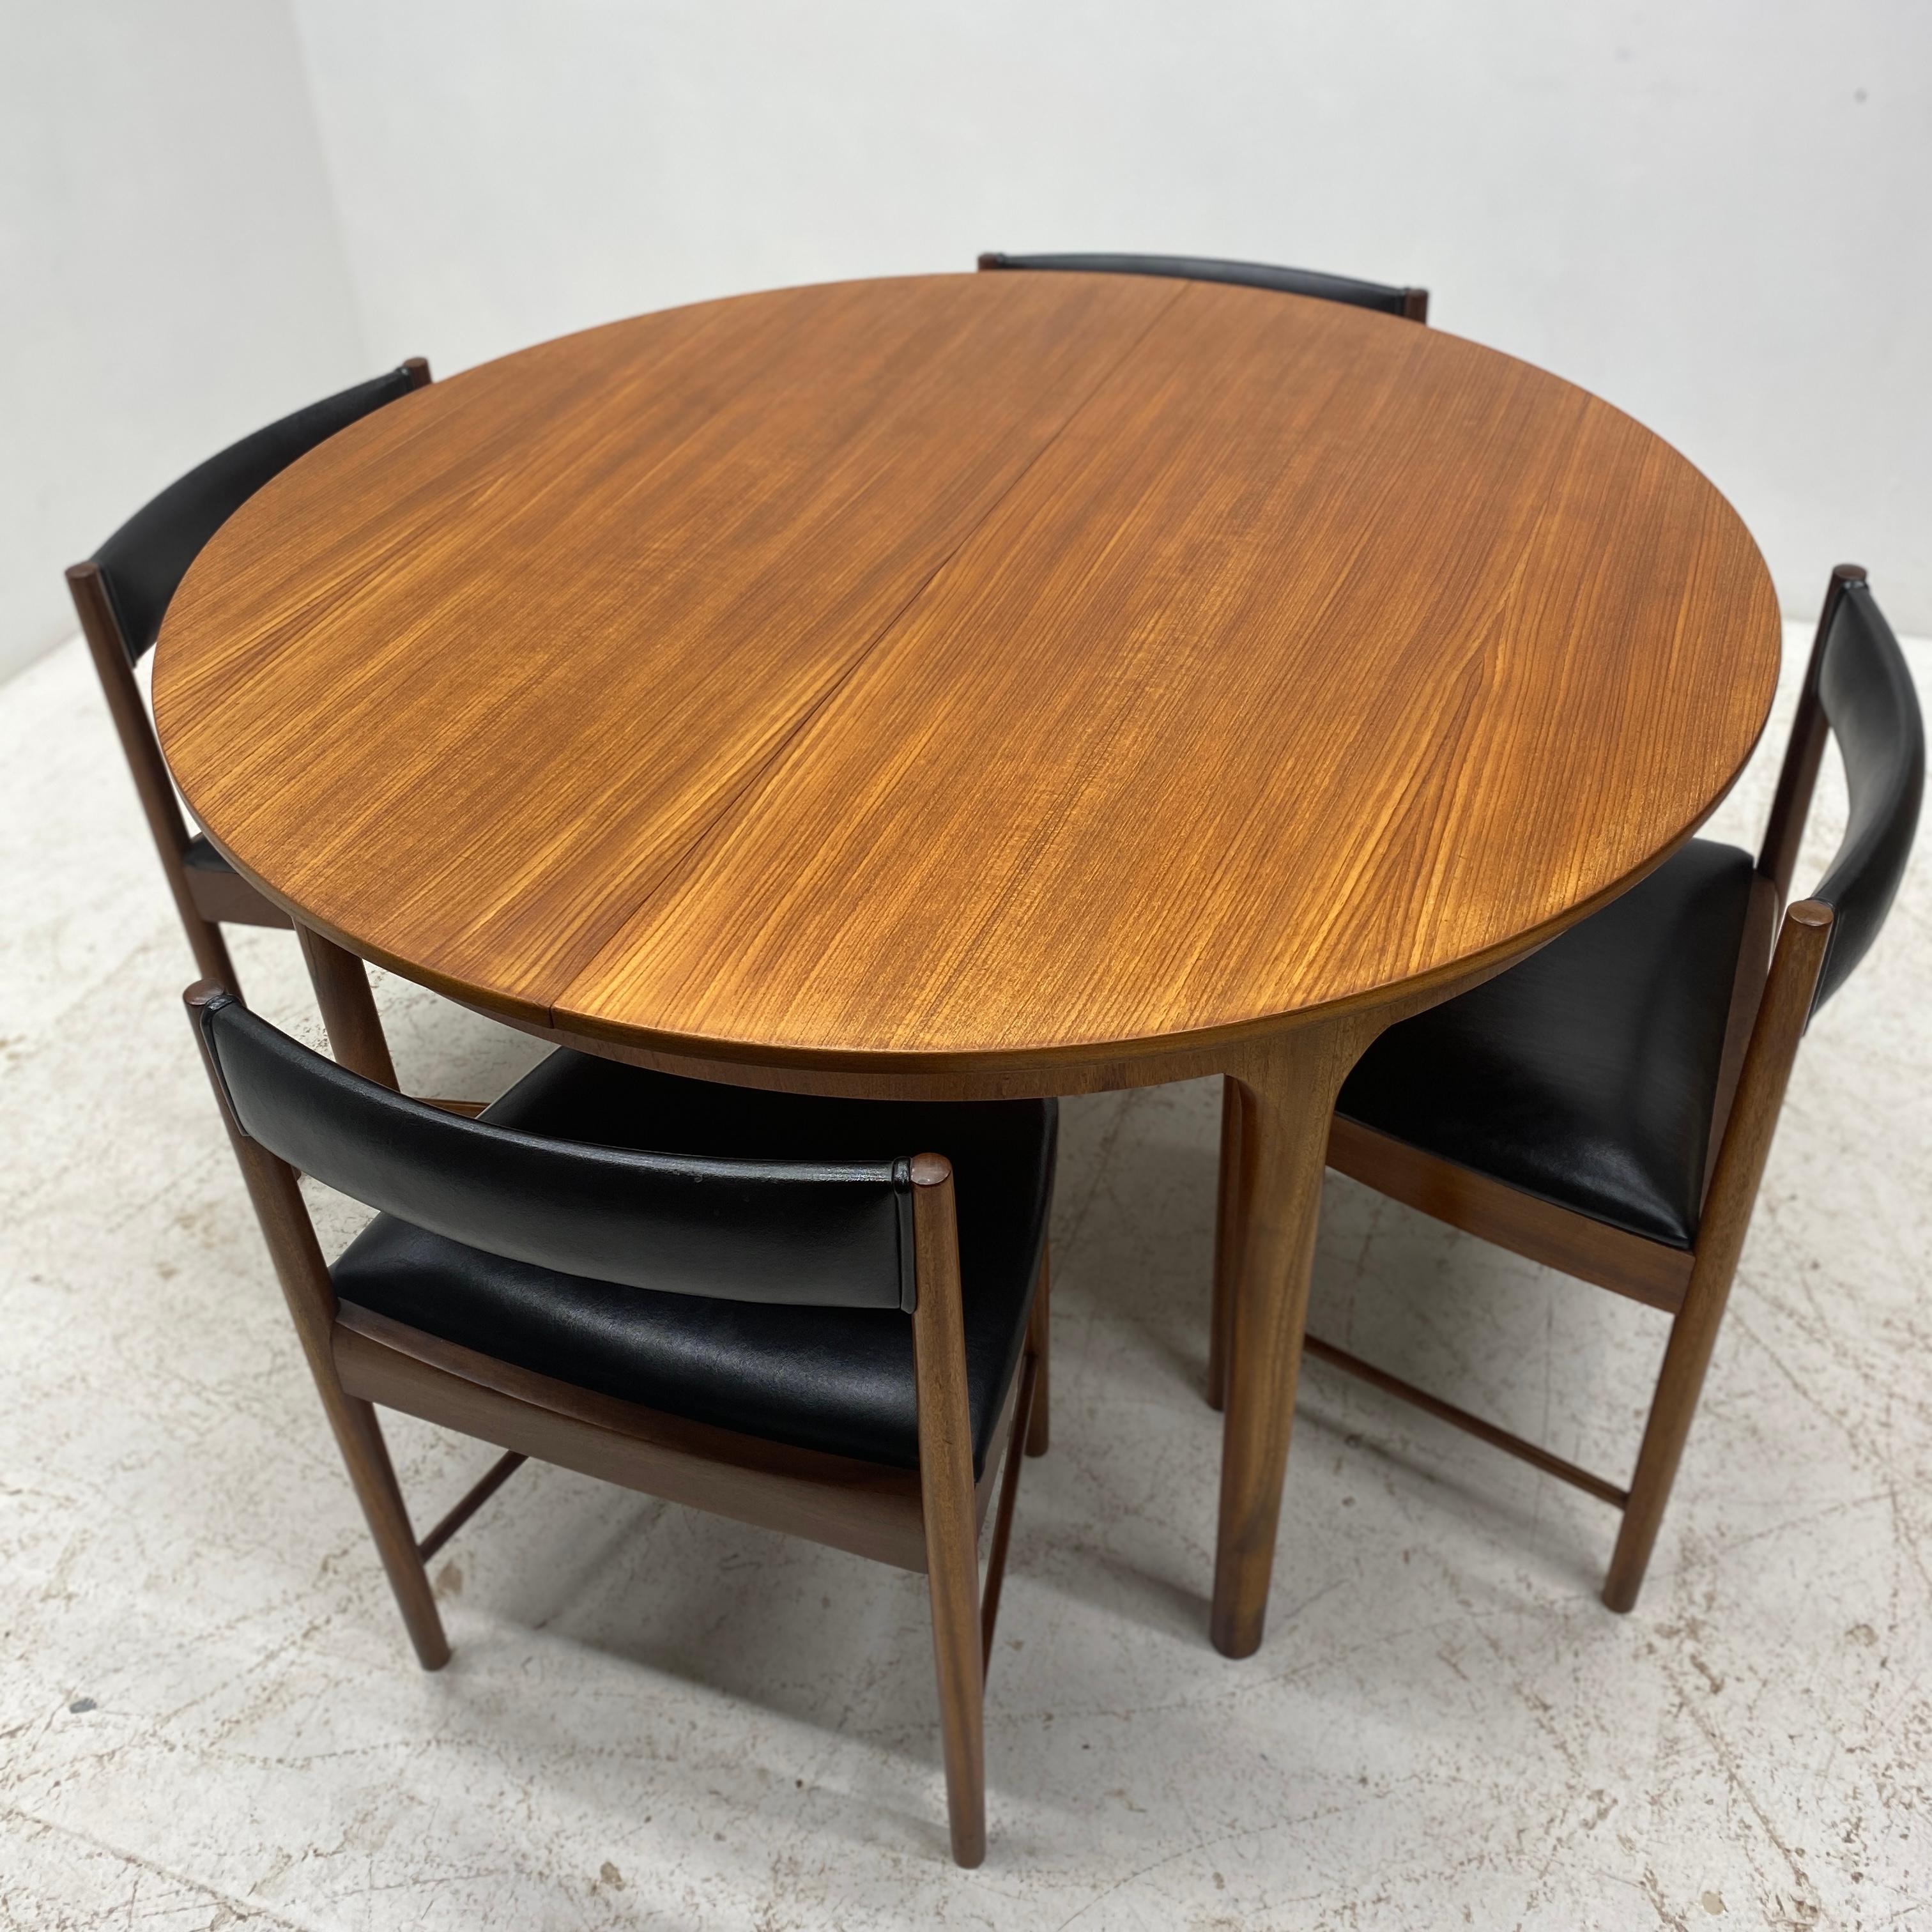 A superb midcentury 1960s McIntosh & Co Ltd, Kirkcaldy Scotland dining table & chairs. The dining table is teak & rosewood & has been fully refurbished. The dining chairs are in rosewood, teak & black vinyl. The dining table is circular but fully